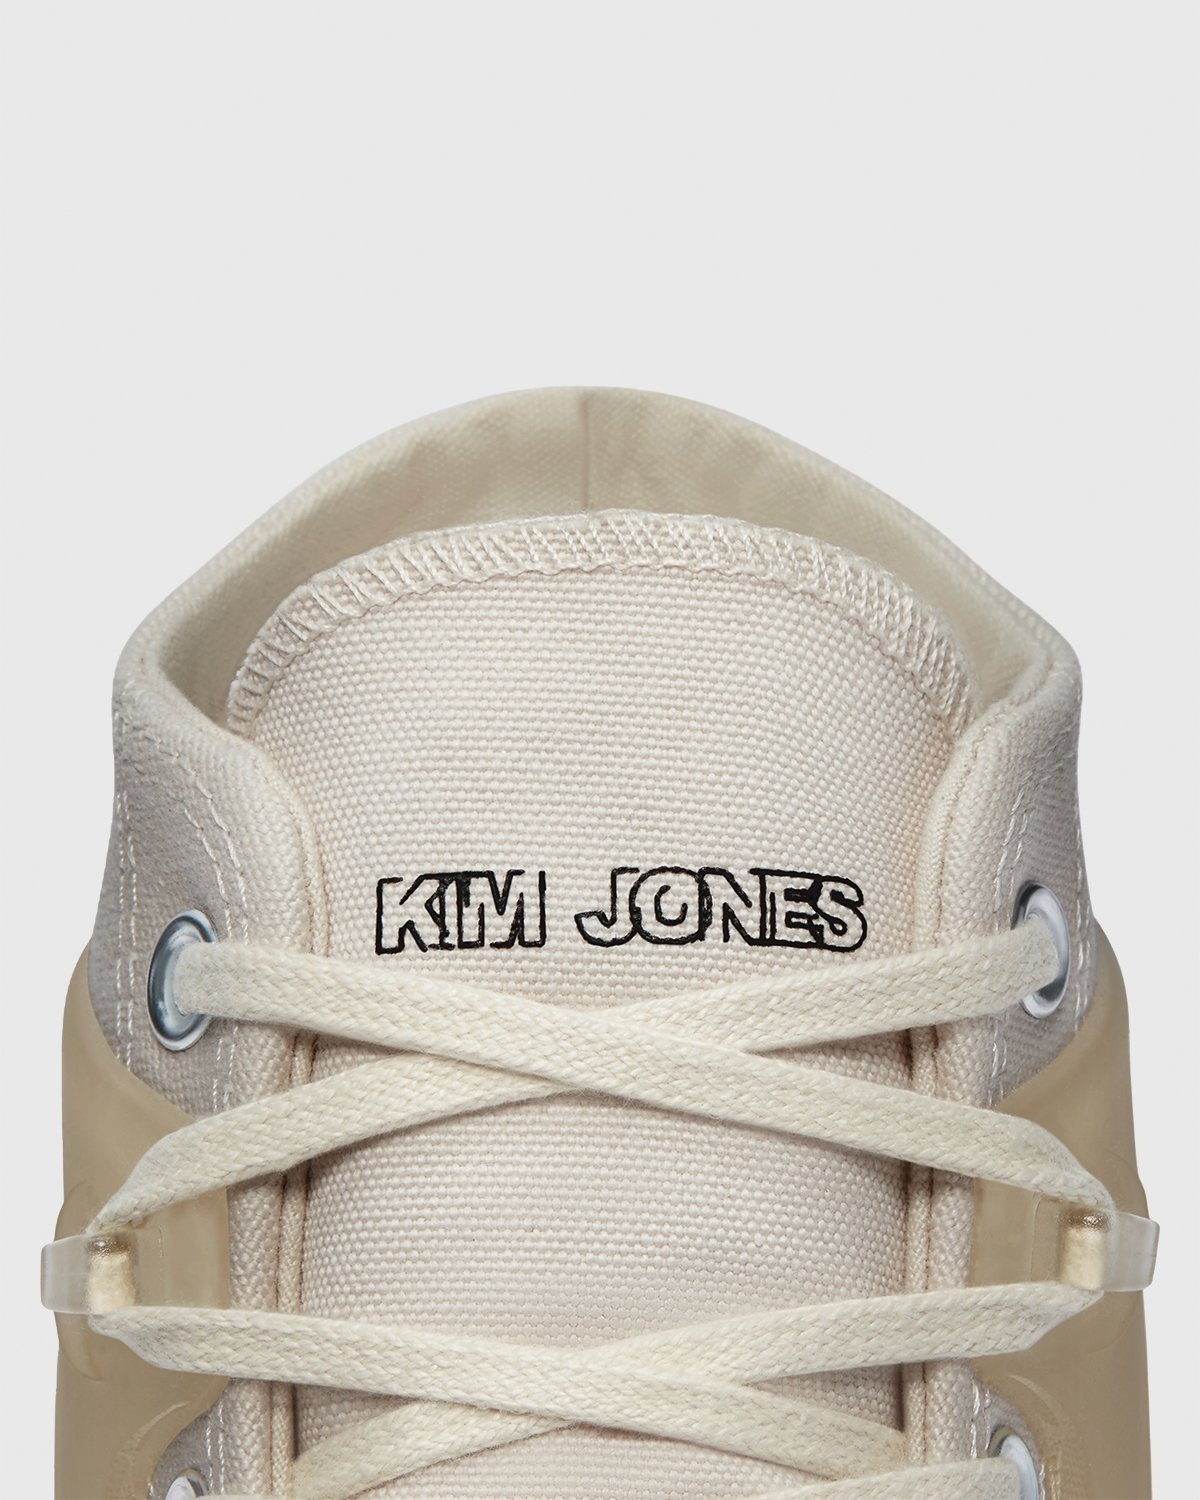 Converse x Kim Jones – Chuck 70 Utility Wave Natural Ivory - High Top Sneakers - Beige - Image 8